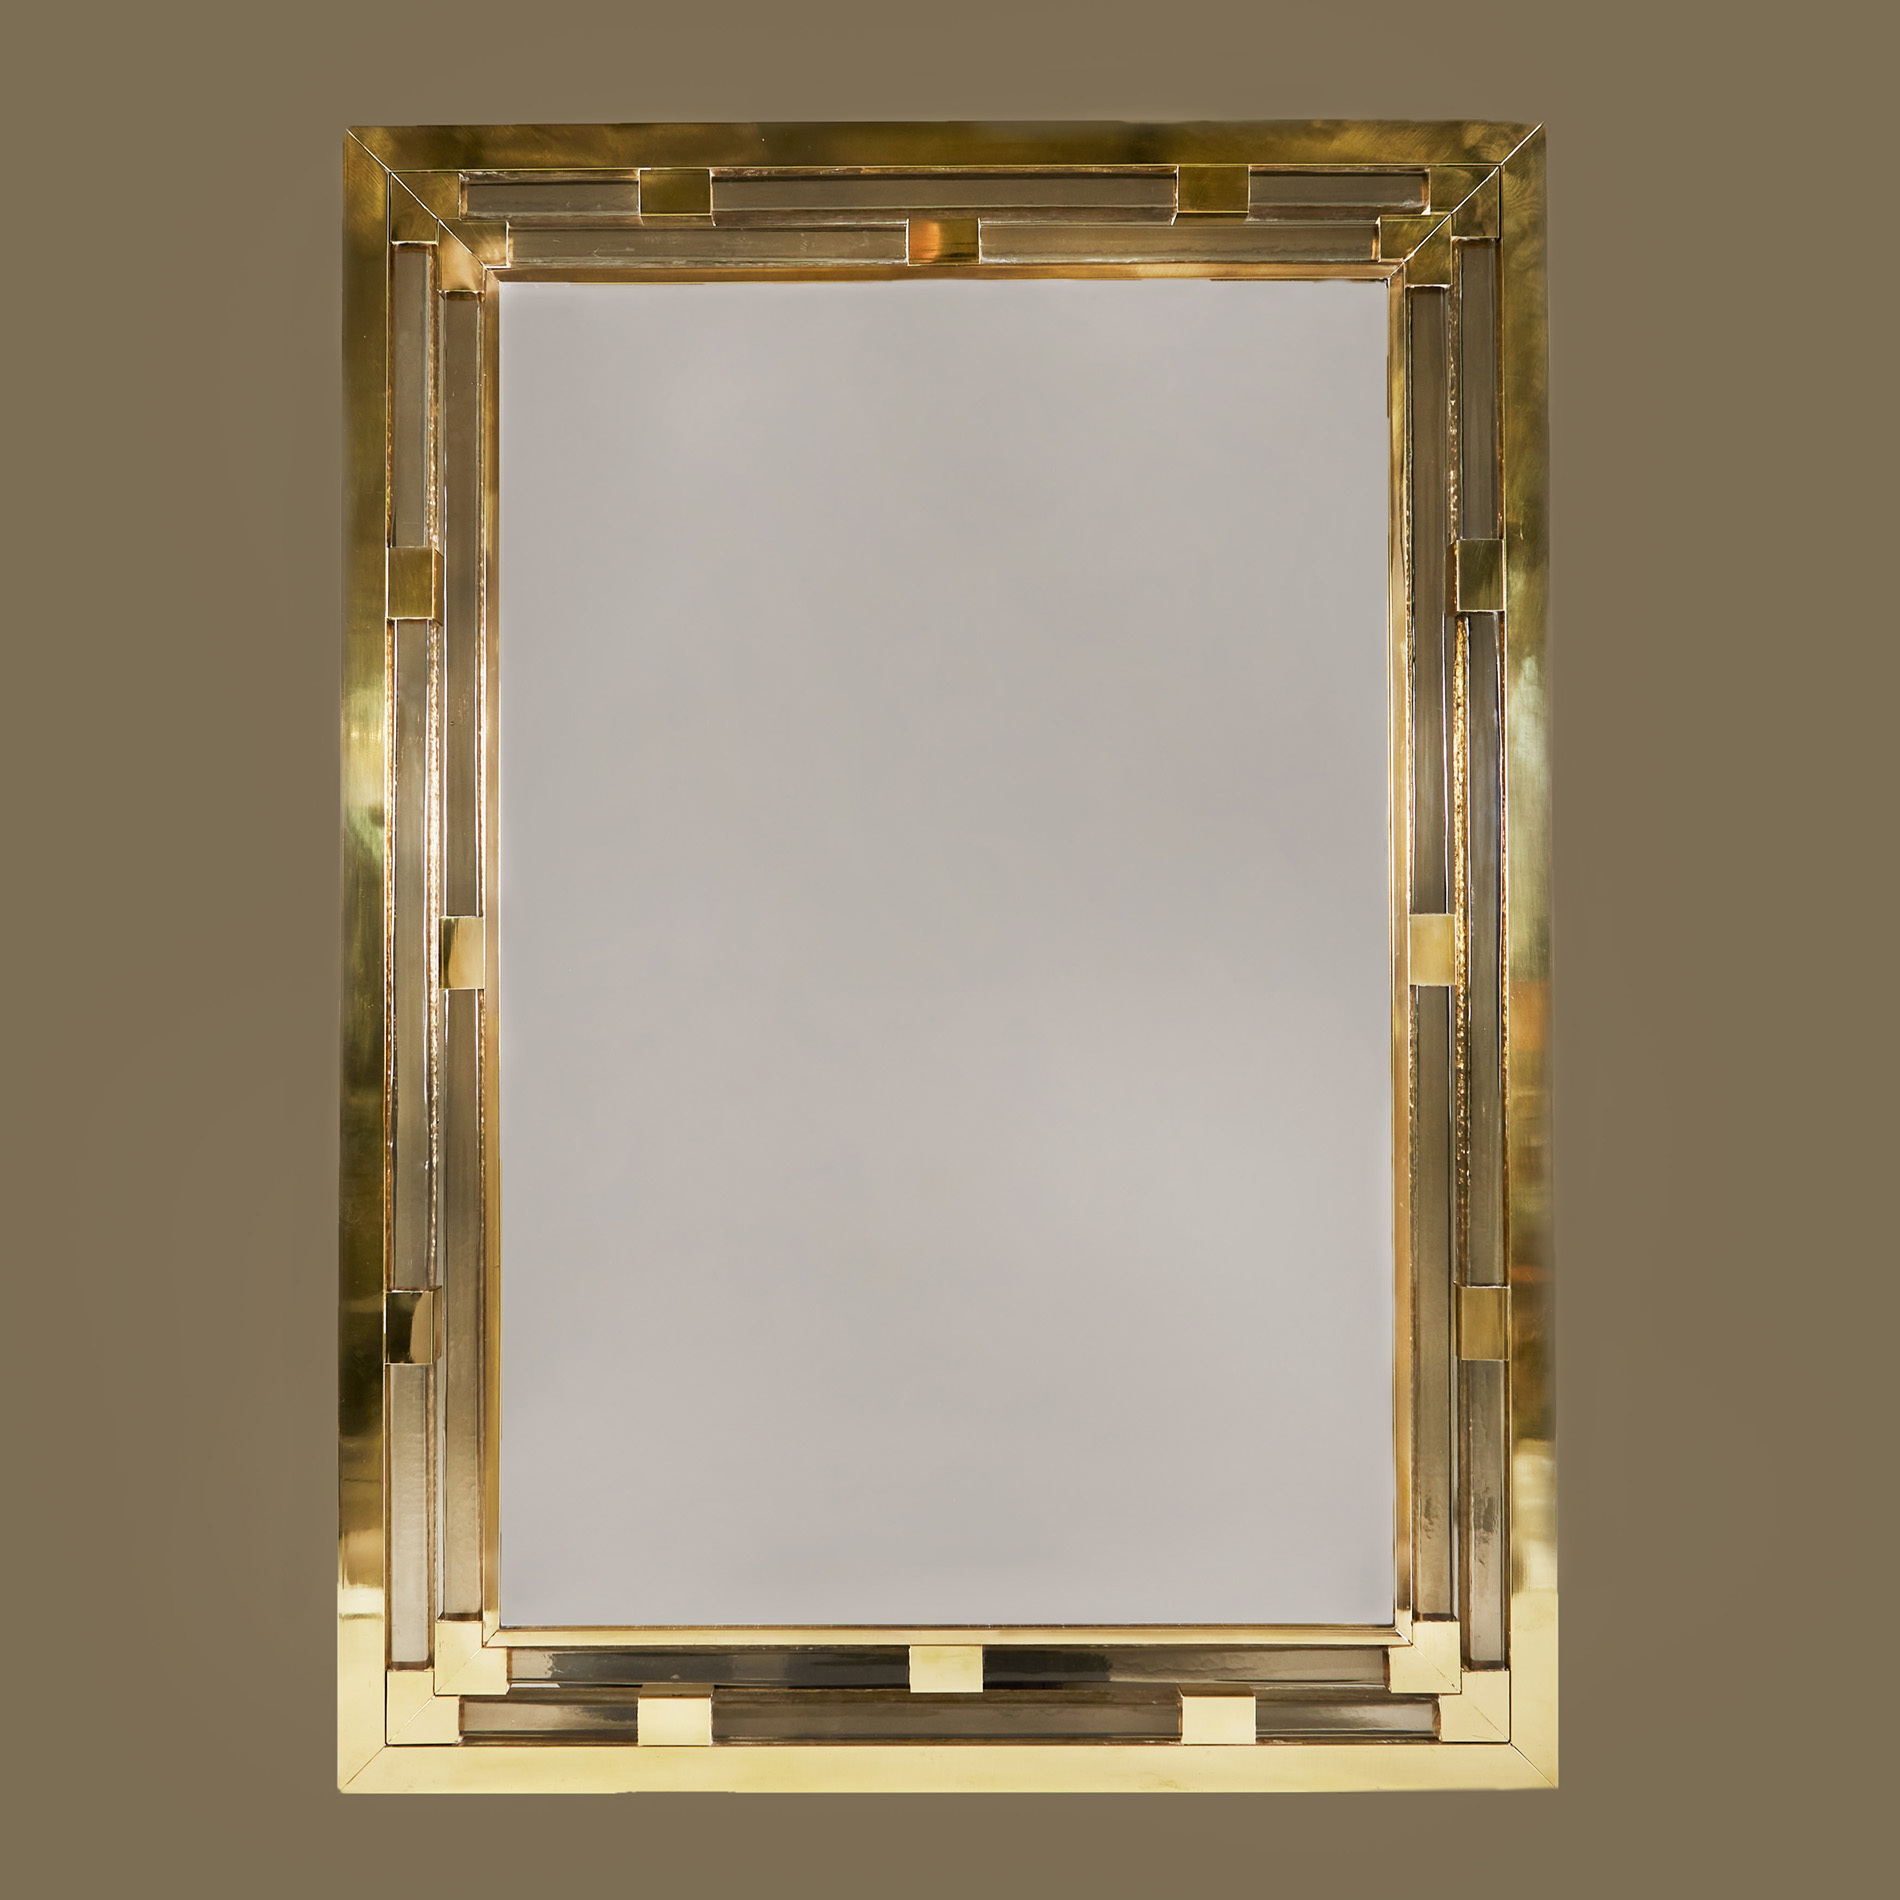 The image for Gold Glass Mirror 0155 V1